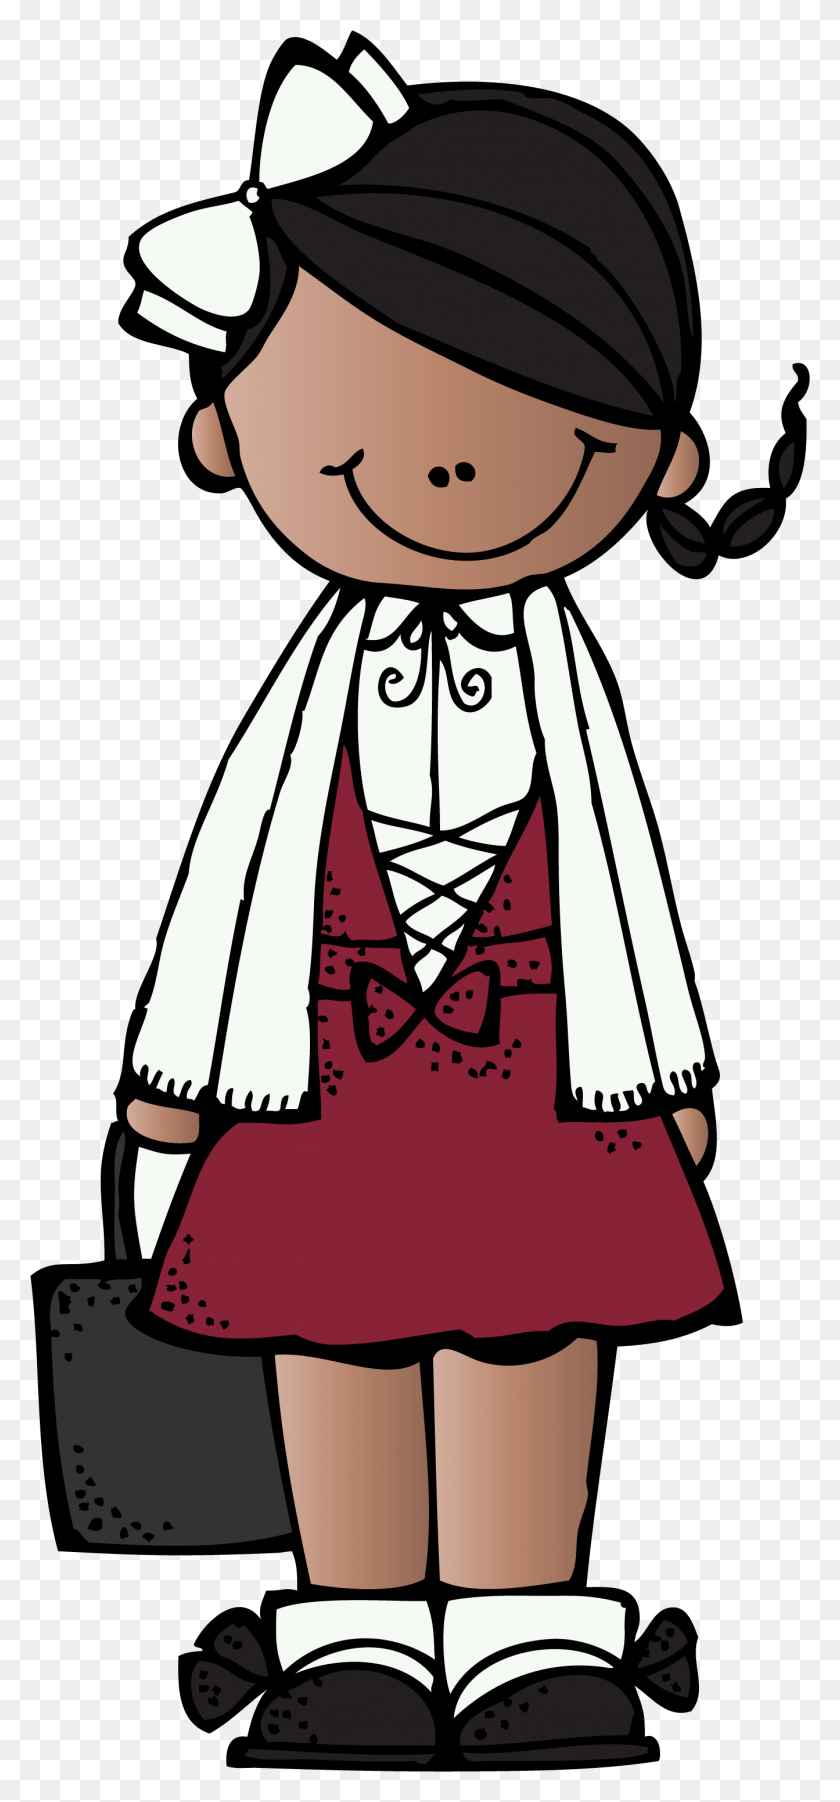 1343x3001 Google Search Educlips School Clipart Elementary Cartoon Pictures Of Ruby Bridges, Ropa, Persona, Disfraz Hd Png